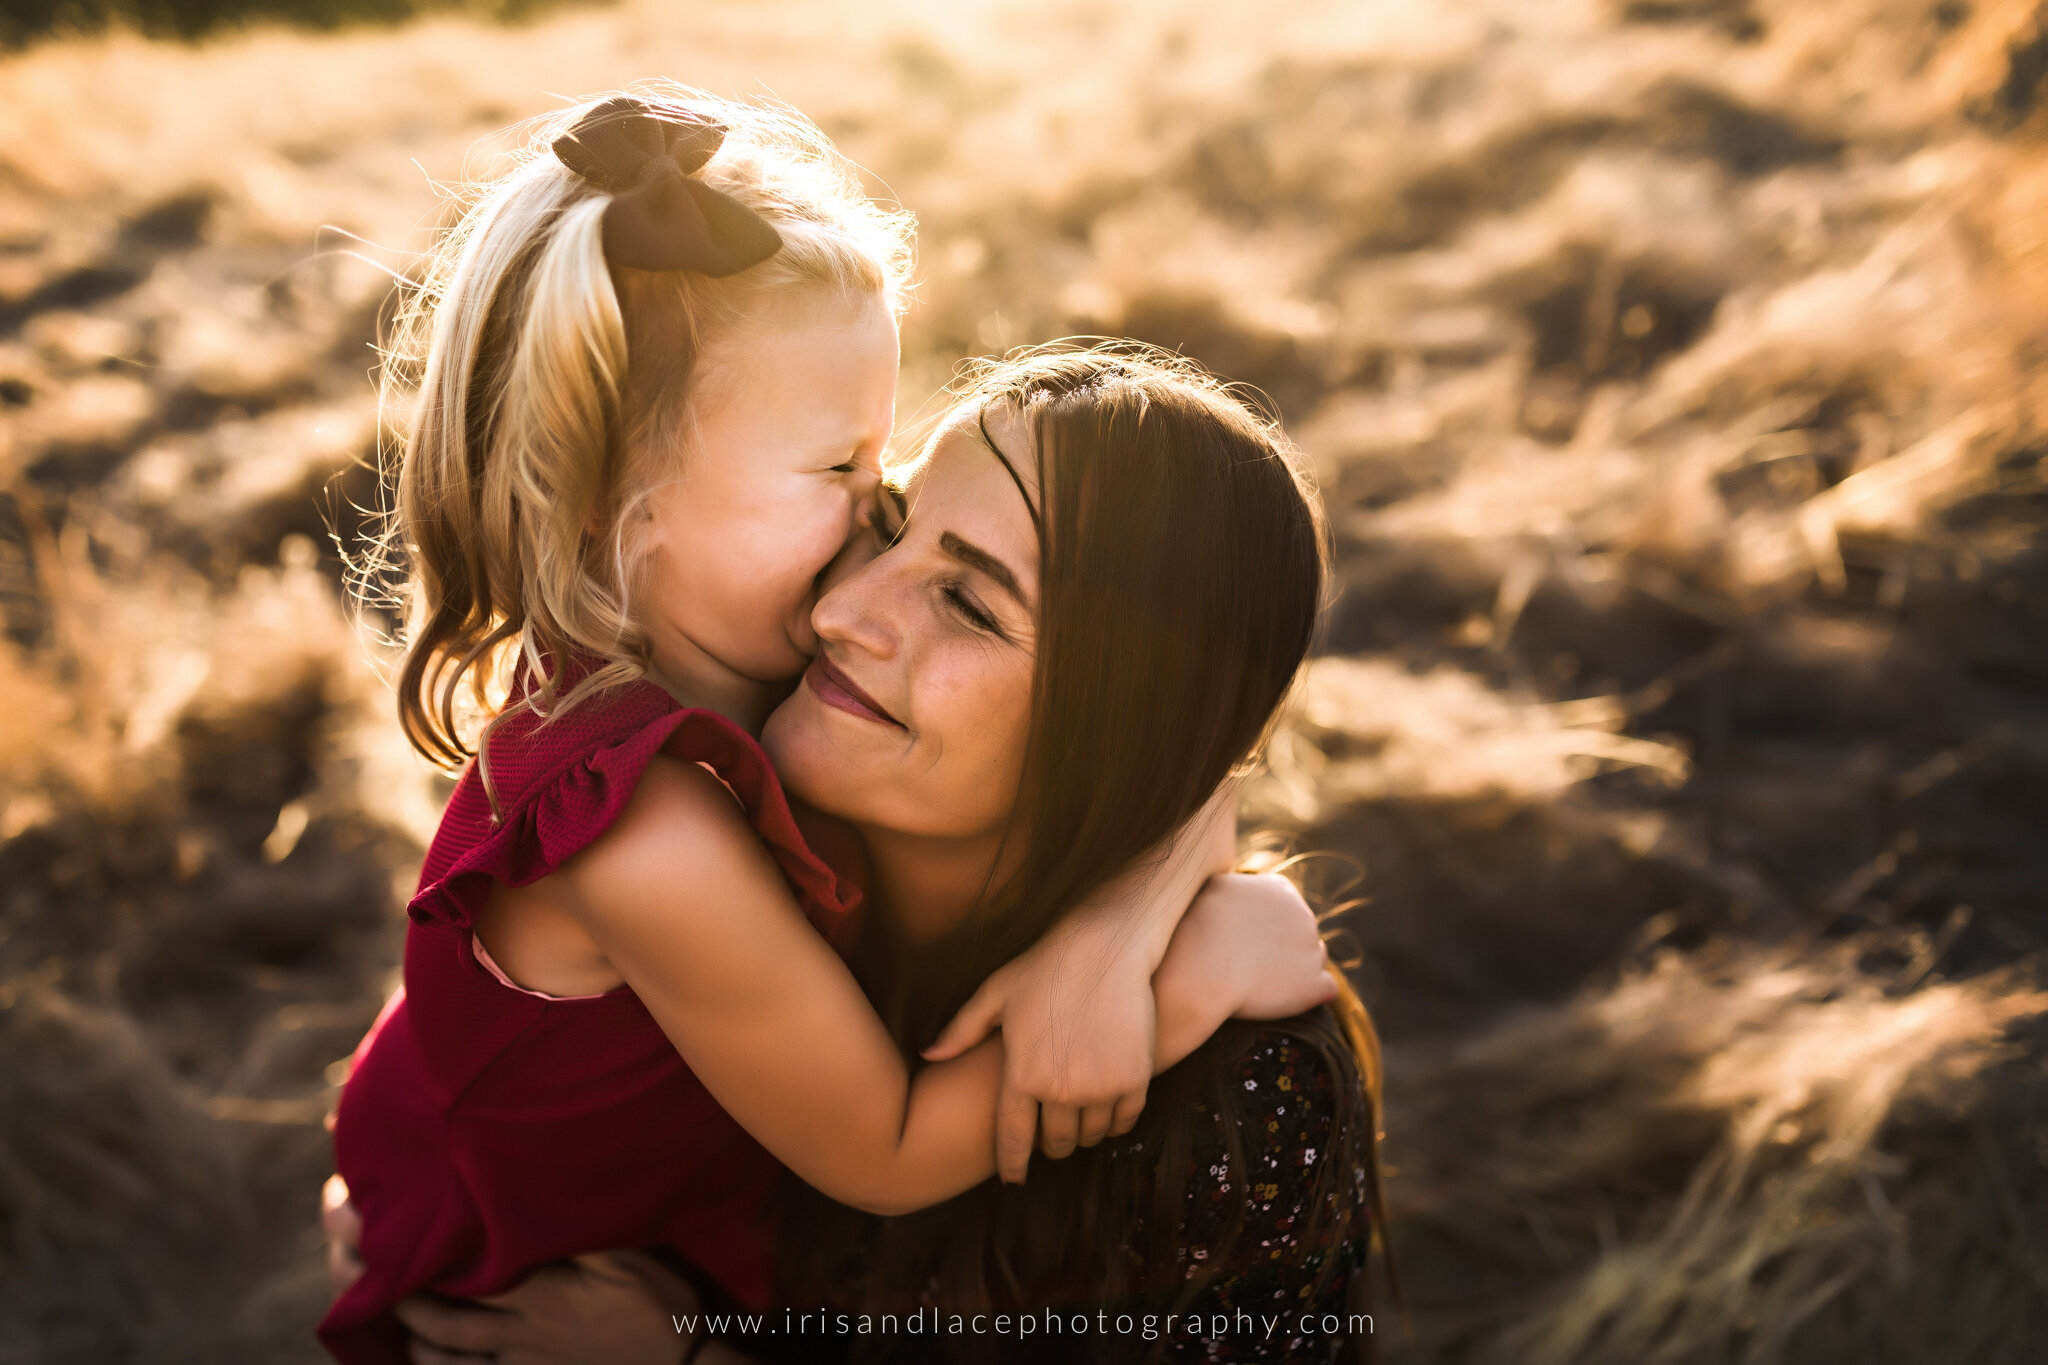 Mother Daughter Photos in Palo Alto, California   |  Iris and Lace Photography 